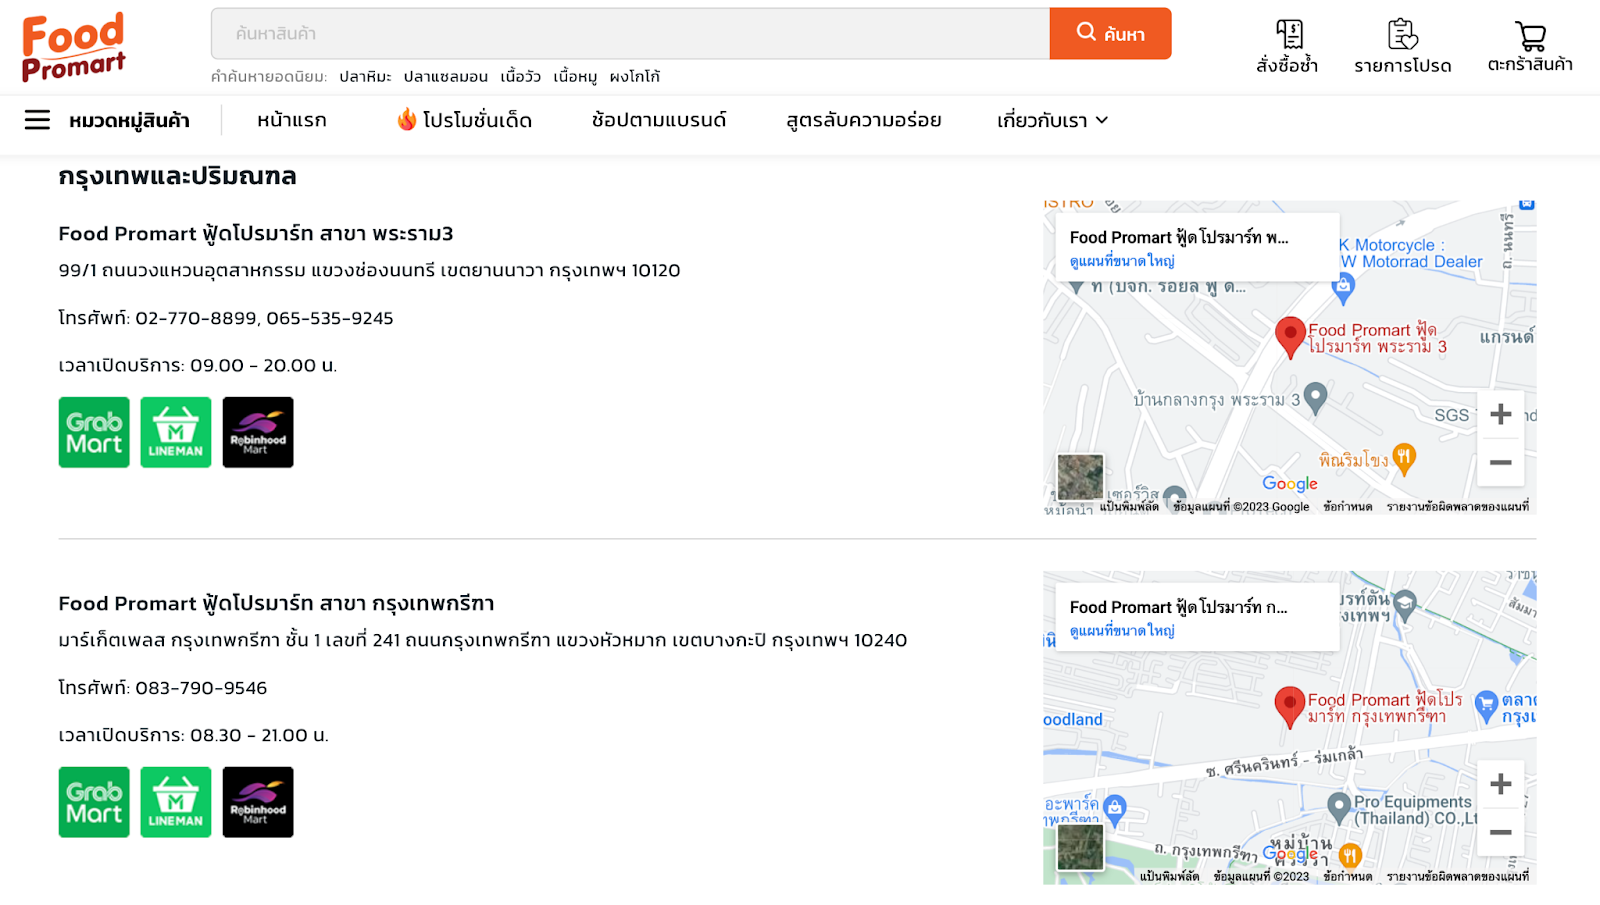 Google Maps API in CMS Page